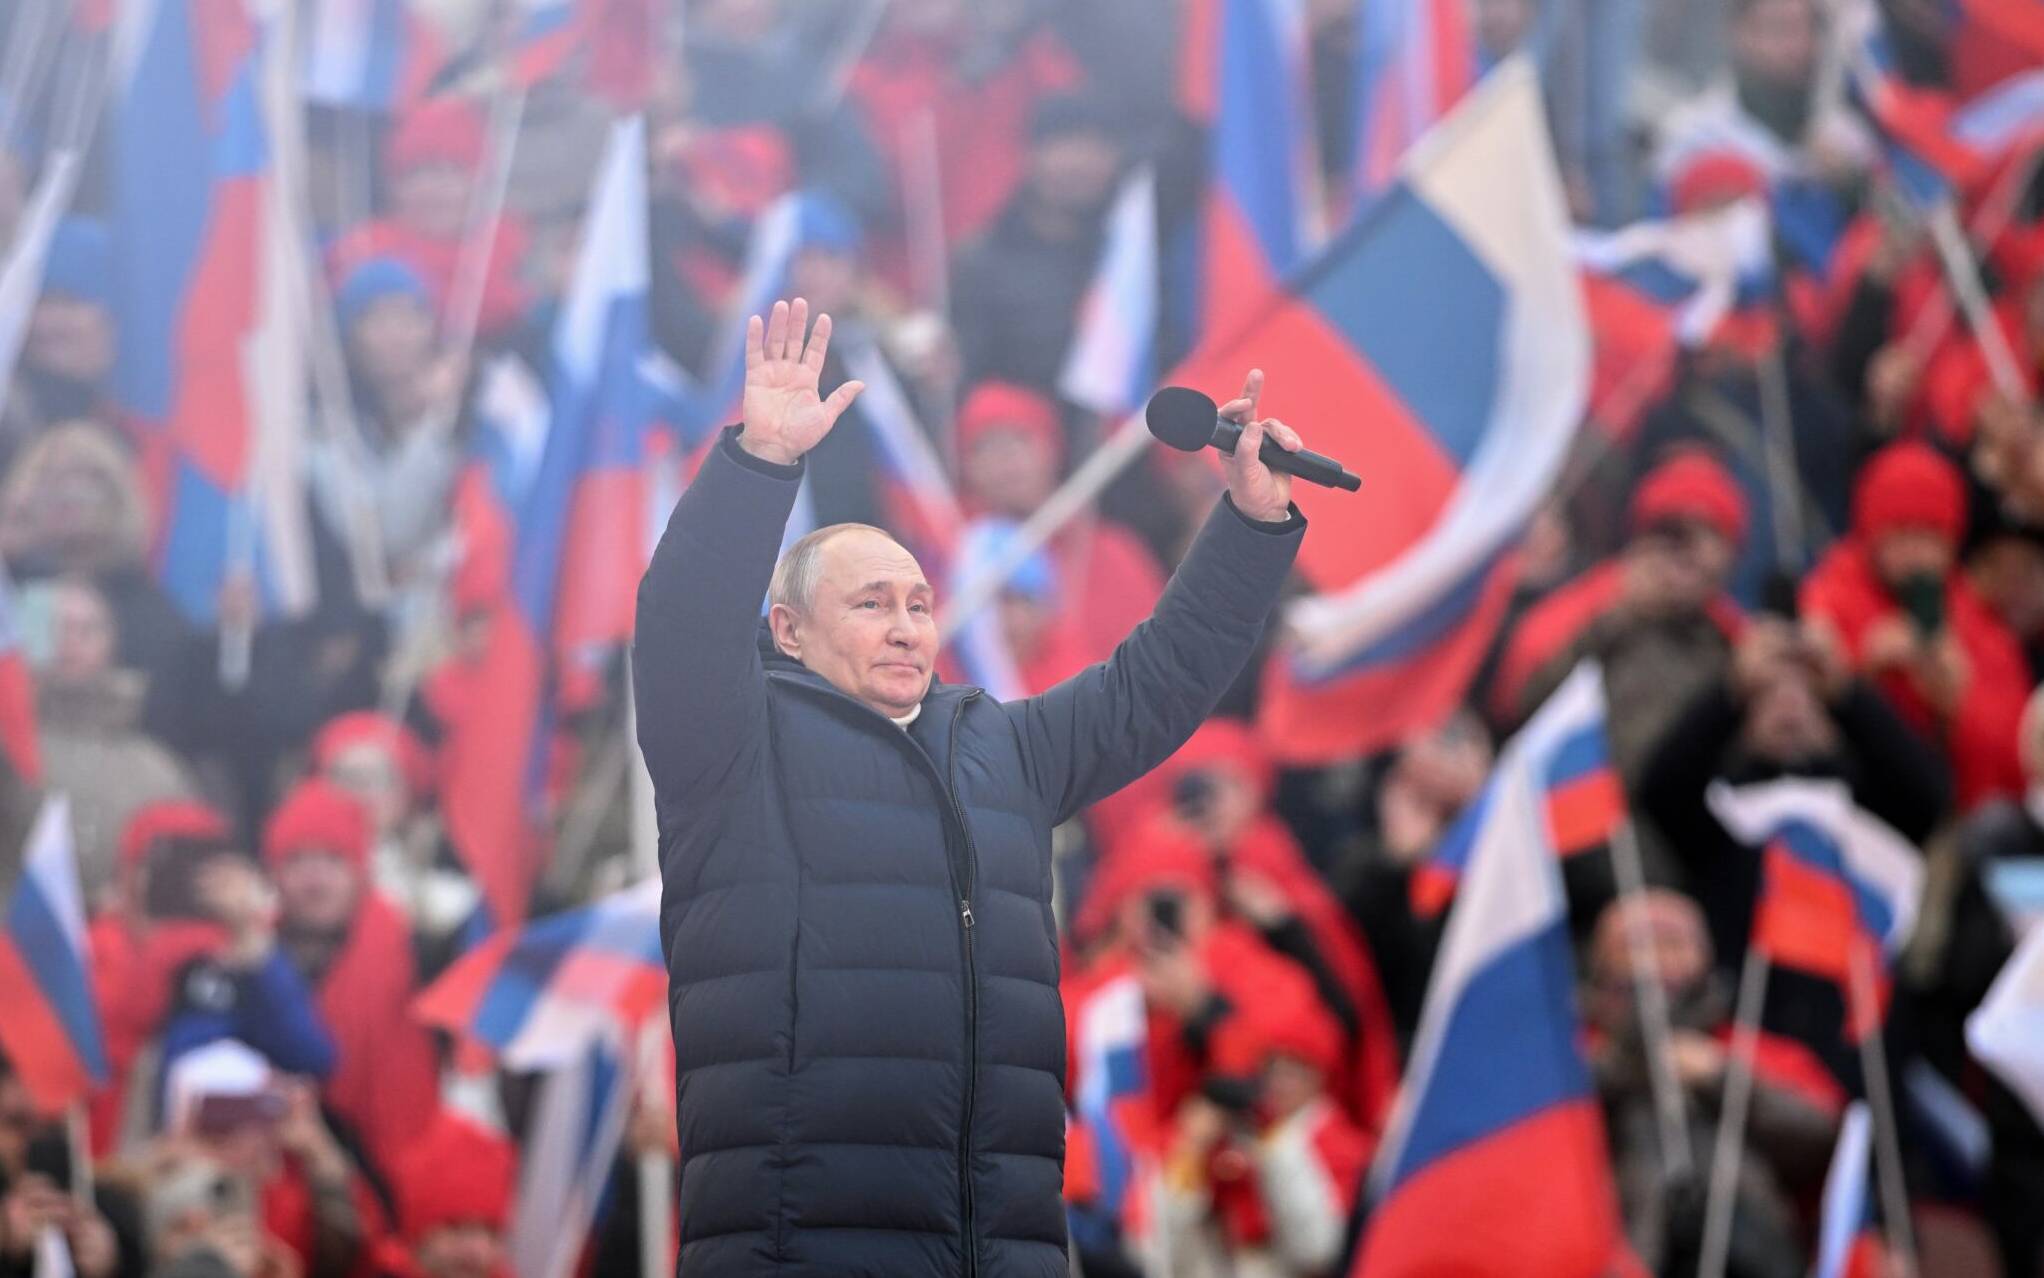 Russian President Vladimir Putin greets the audience as he attends a concert marking the eighth anniversary of Russia's annexation of Crimea at the Luzhniki stadium in Moscow on March 18, 2022. (Photo by Ramil SITDIKOV / POOL / AFP)